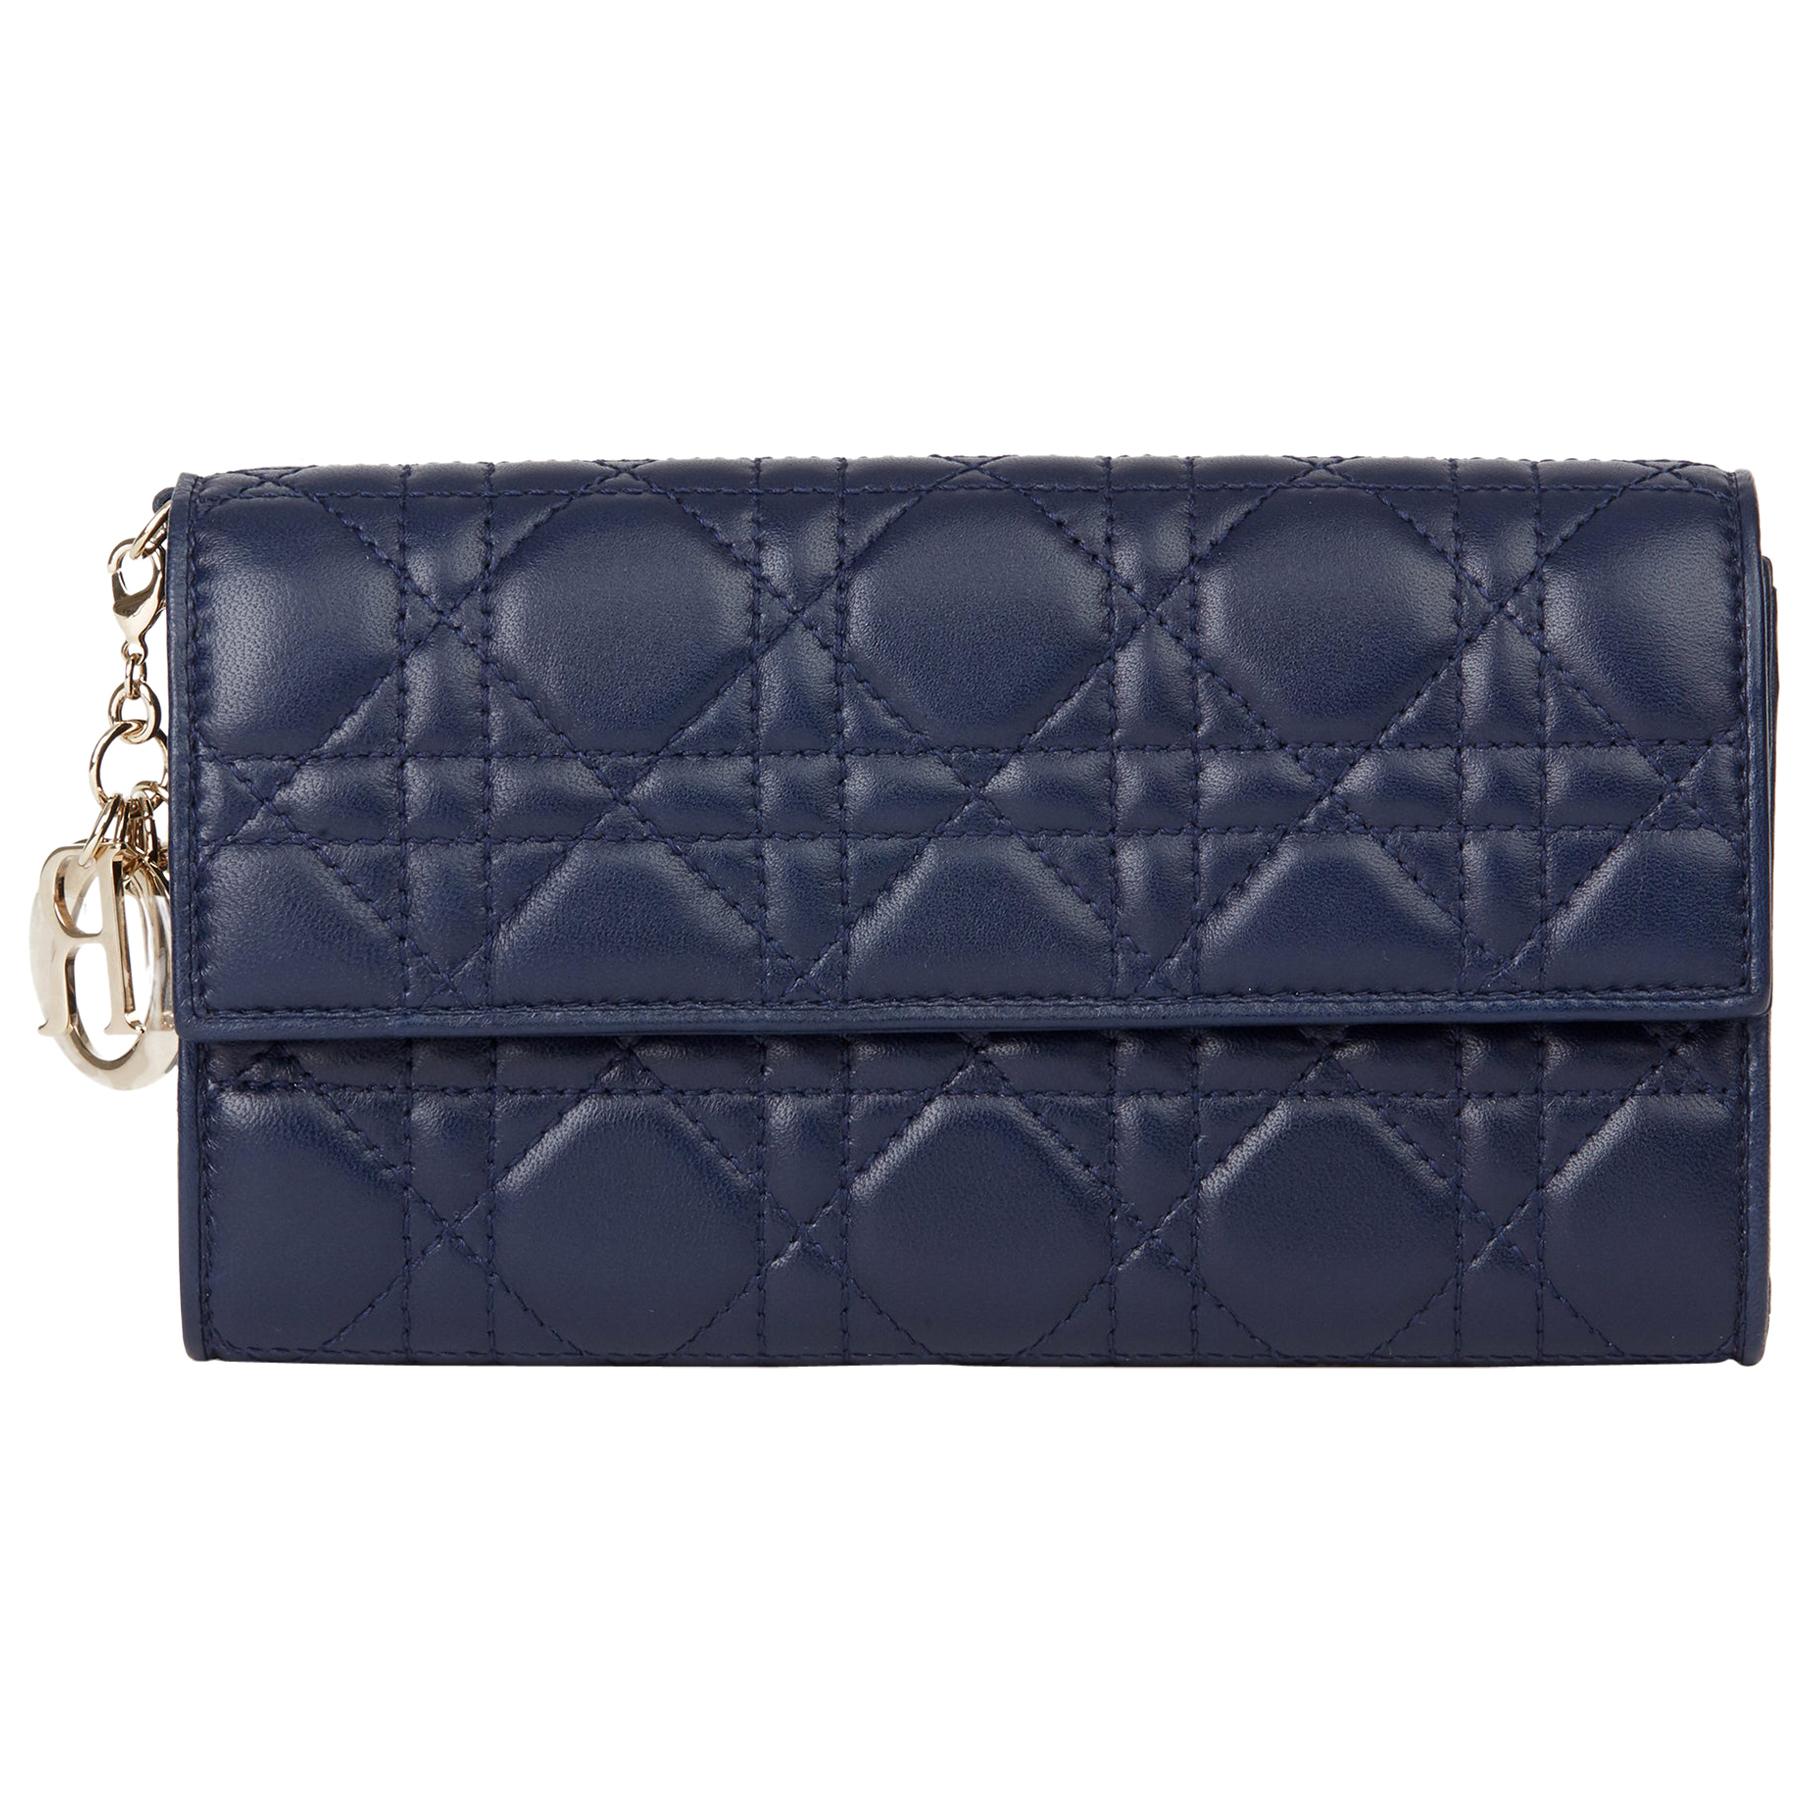 2017 Christian Dior Navy Quilted Lambskin Lady Dior Wallet 